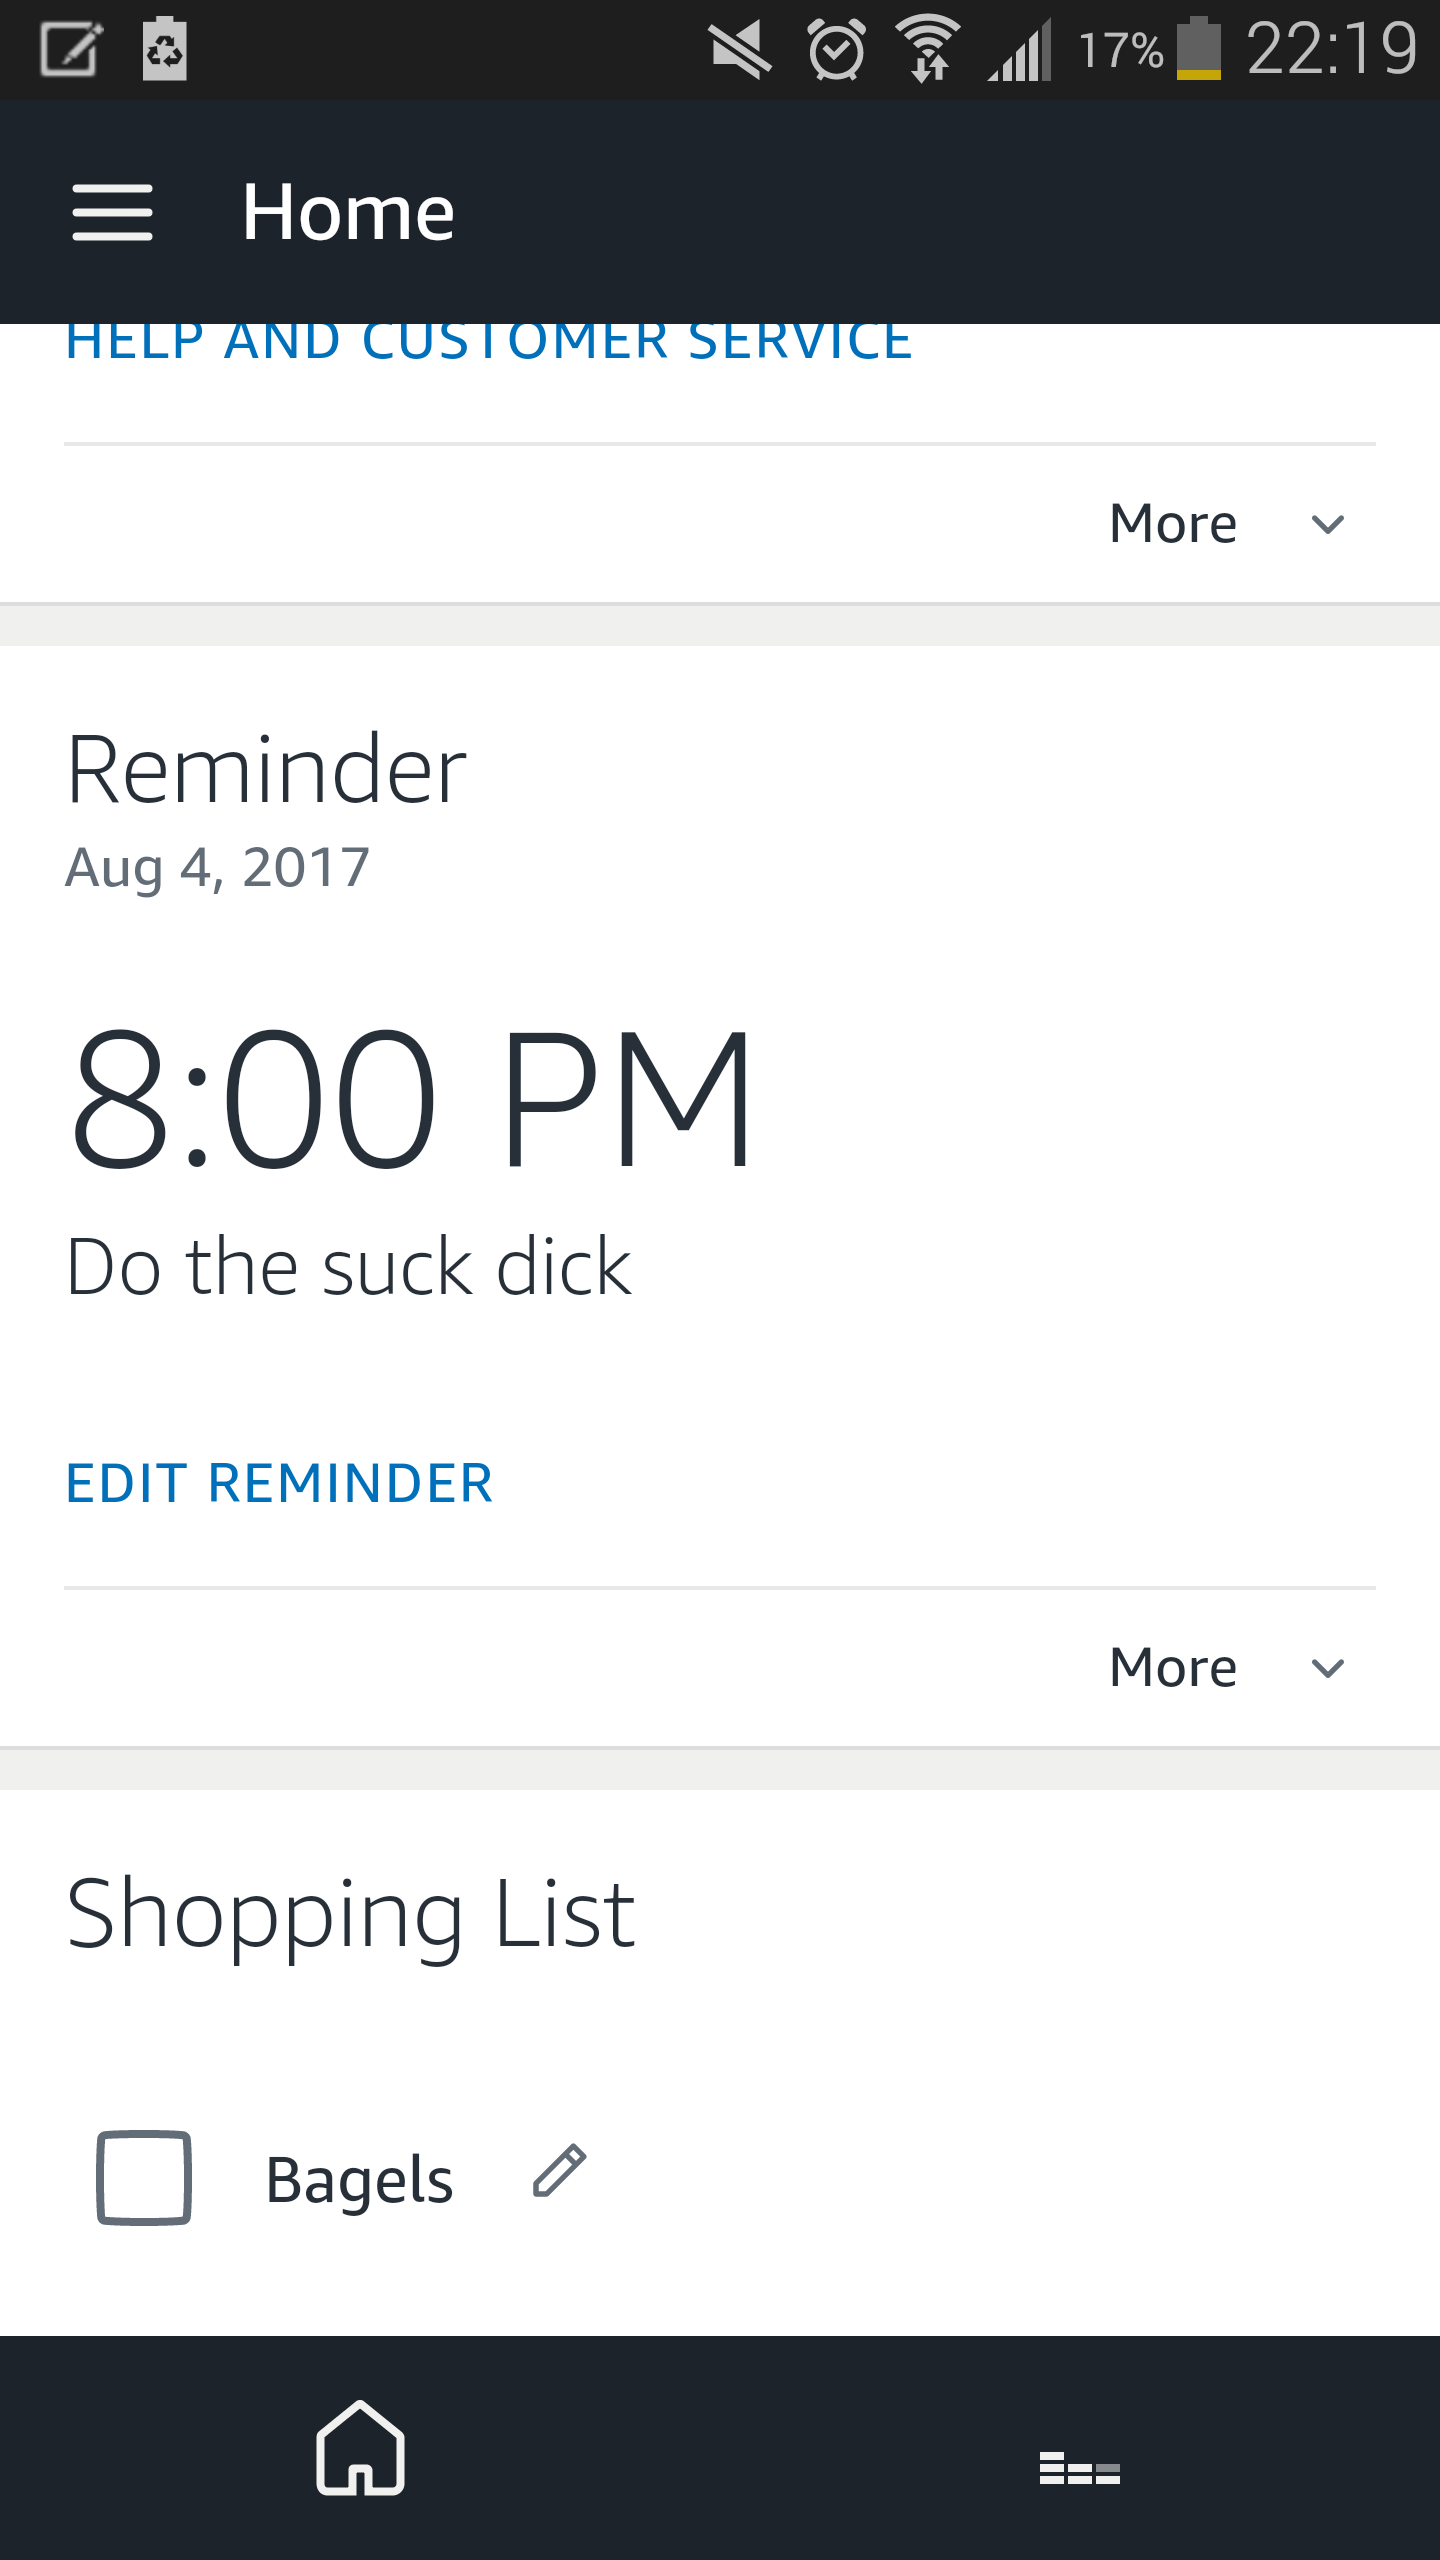 I asked Alexa to remind me about the septic